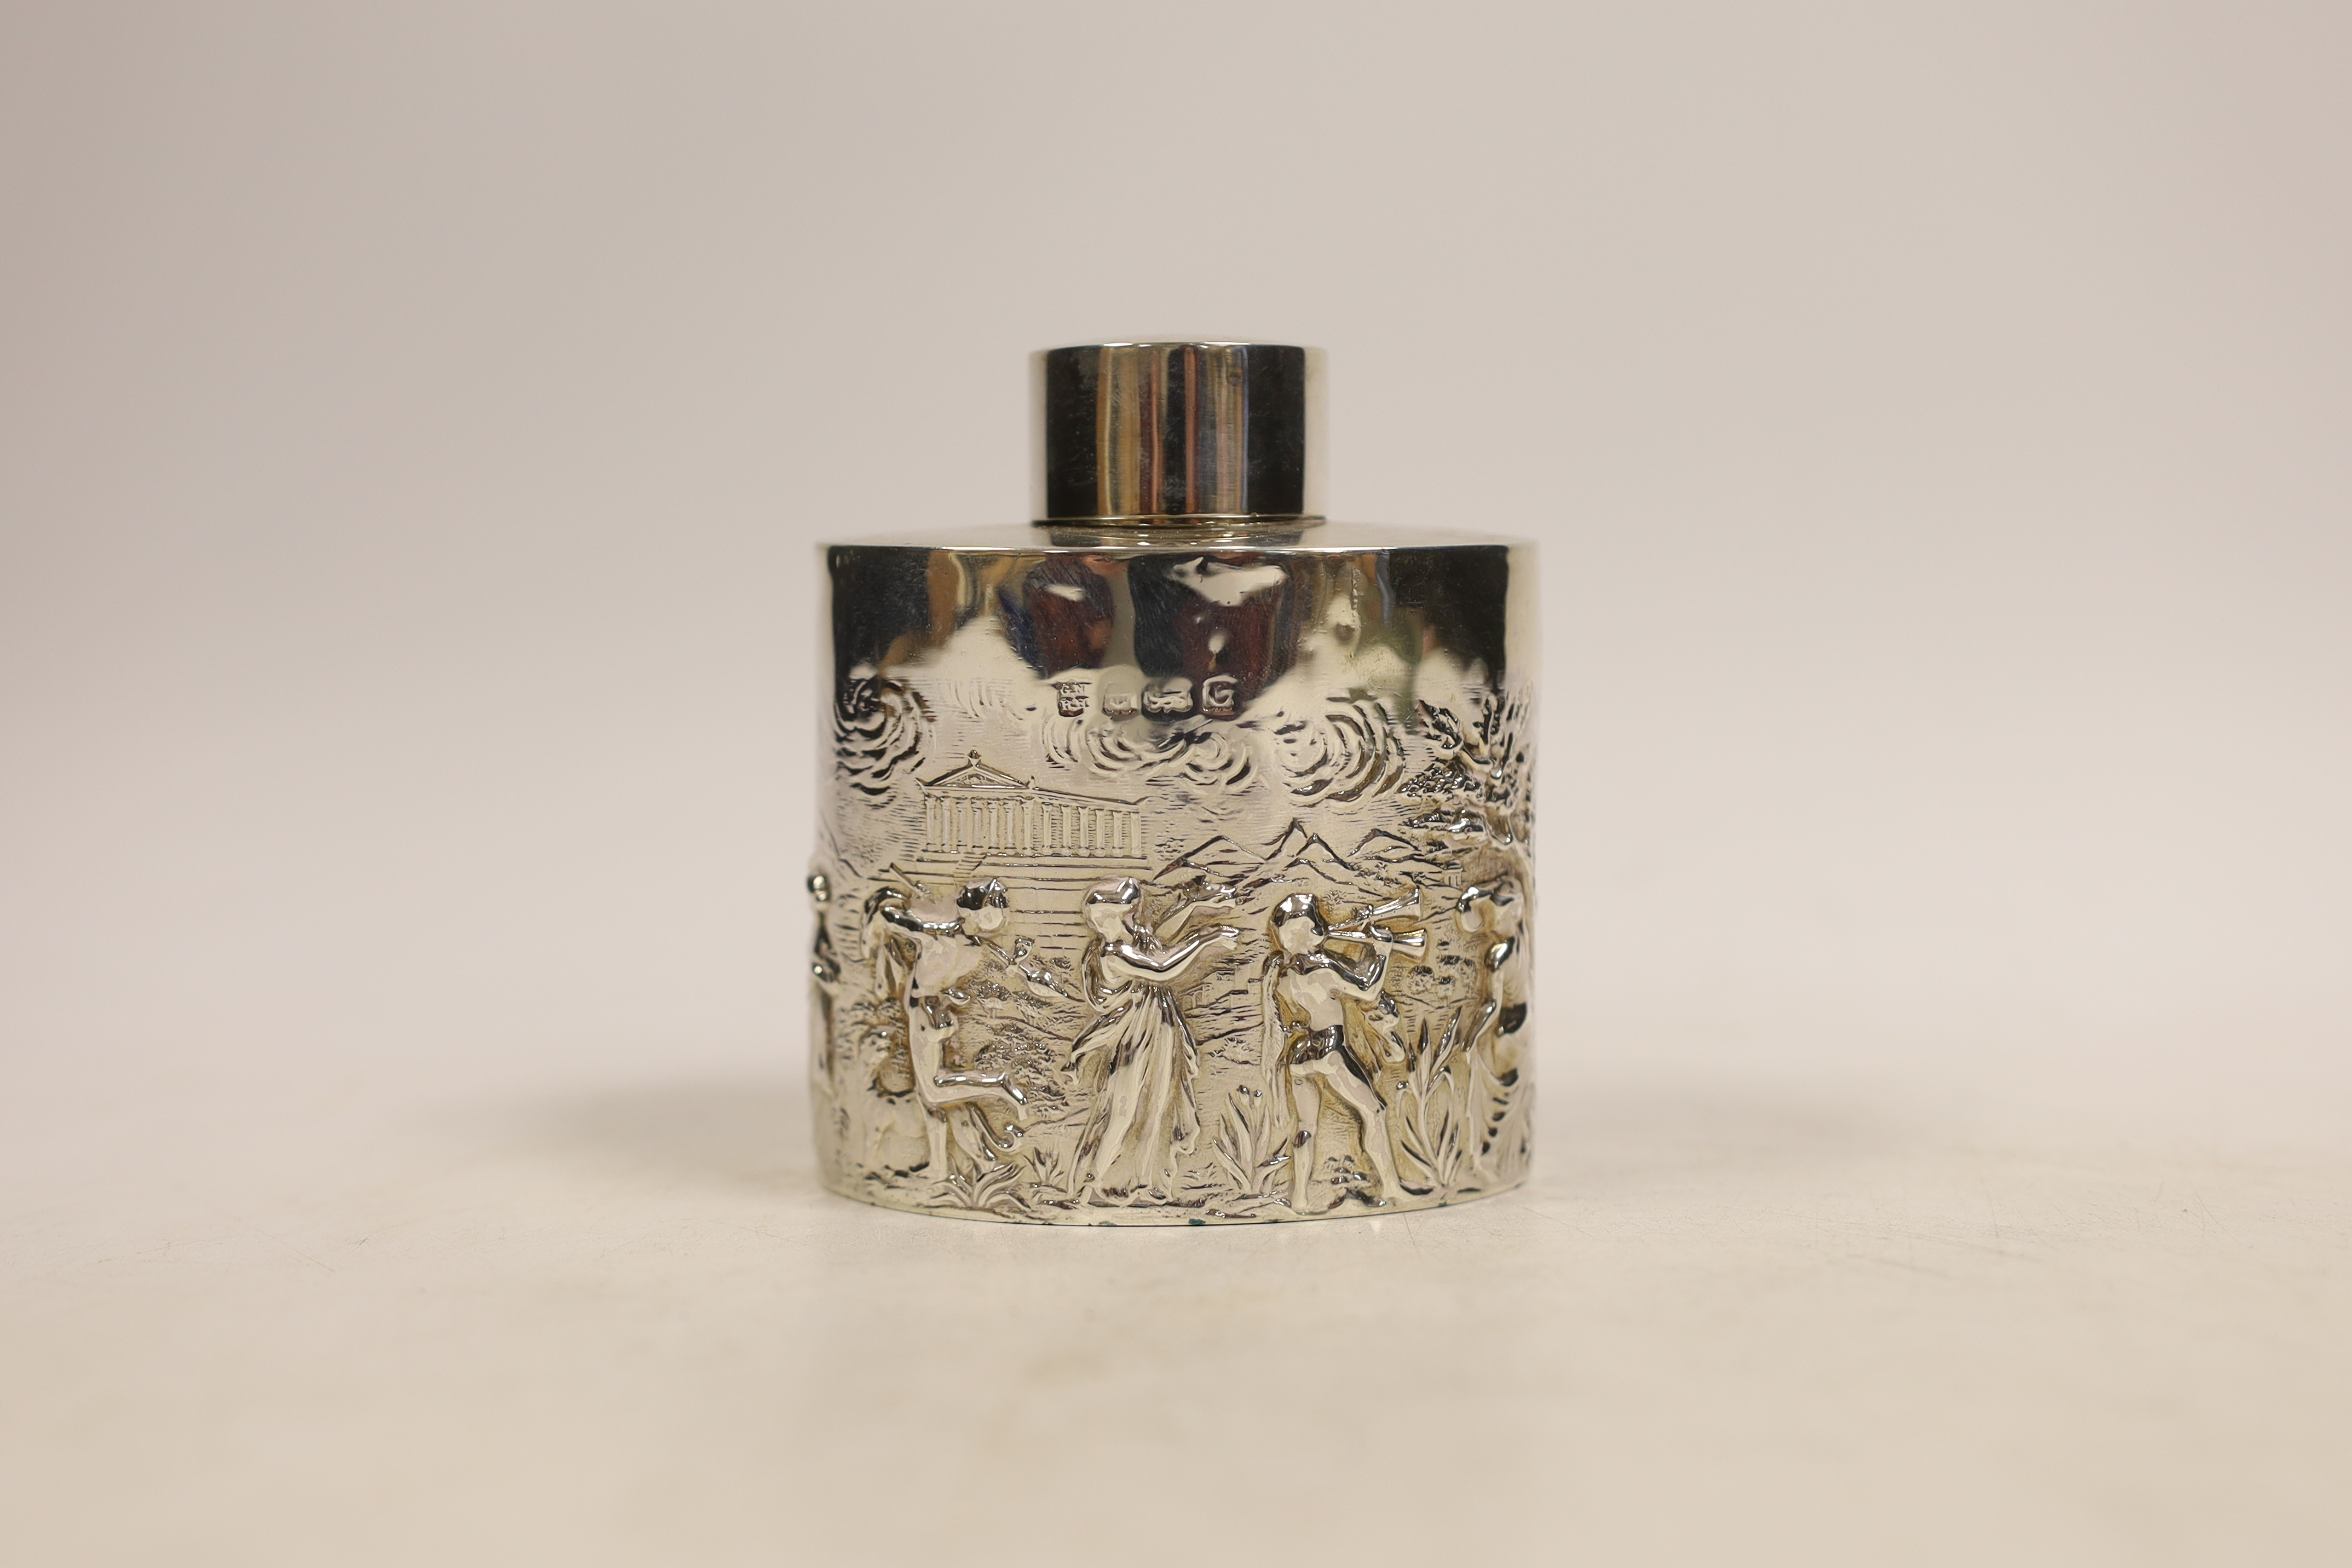 An Edwardian oval silver tea caddy embossed with all round Classical Greek imagery of figures, Parthenon and buildings, Nathan & Hayes, Birmingham, 1902, 90mm.